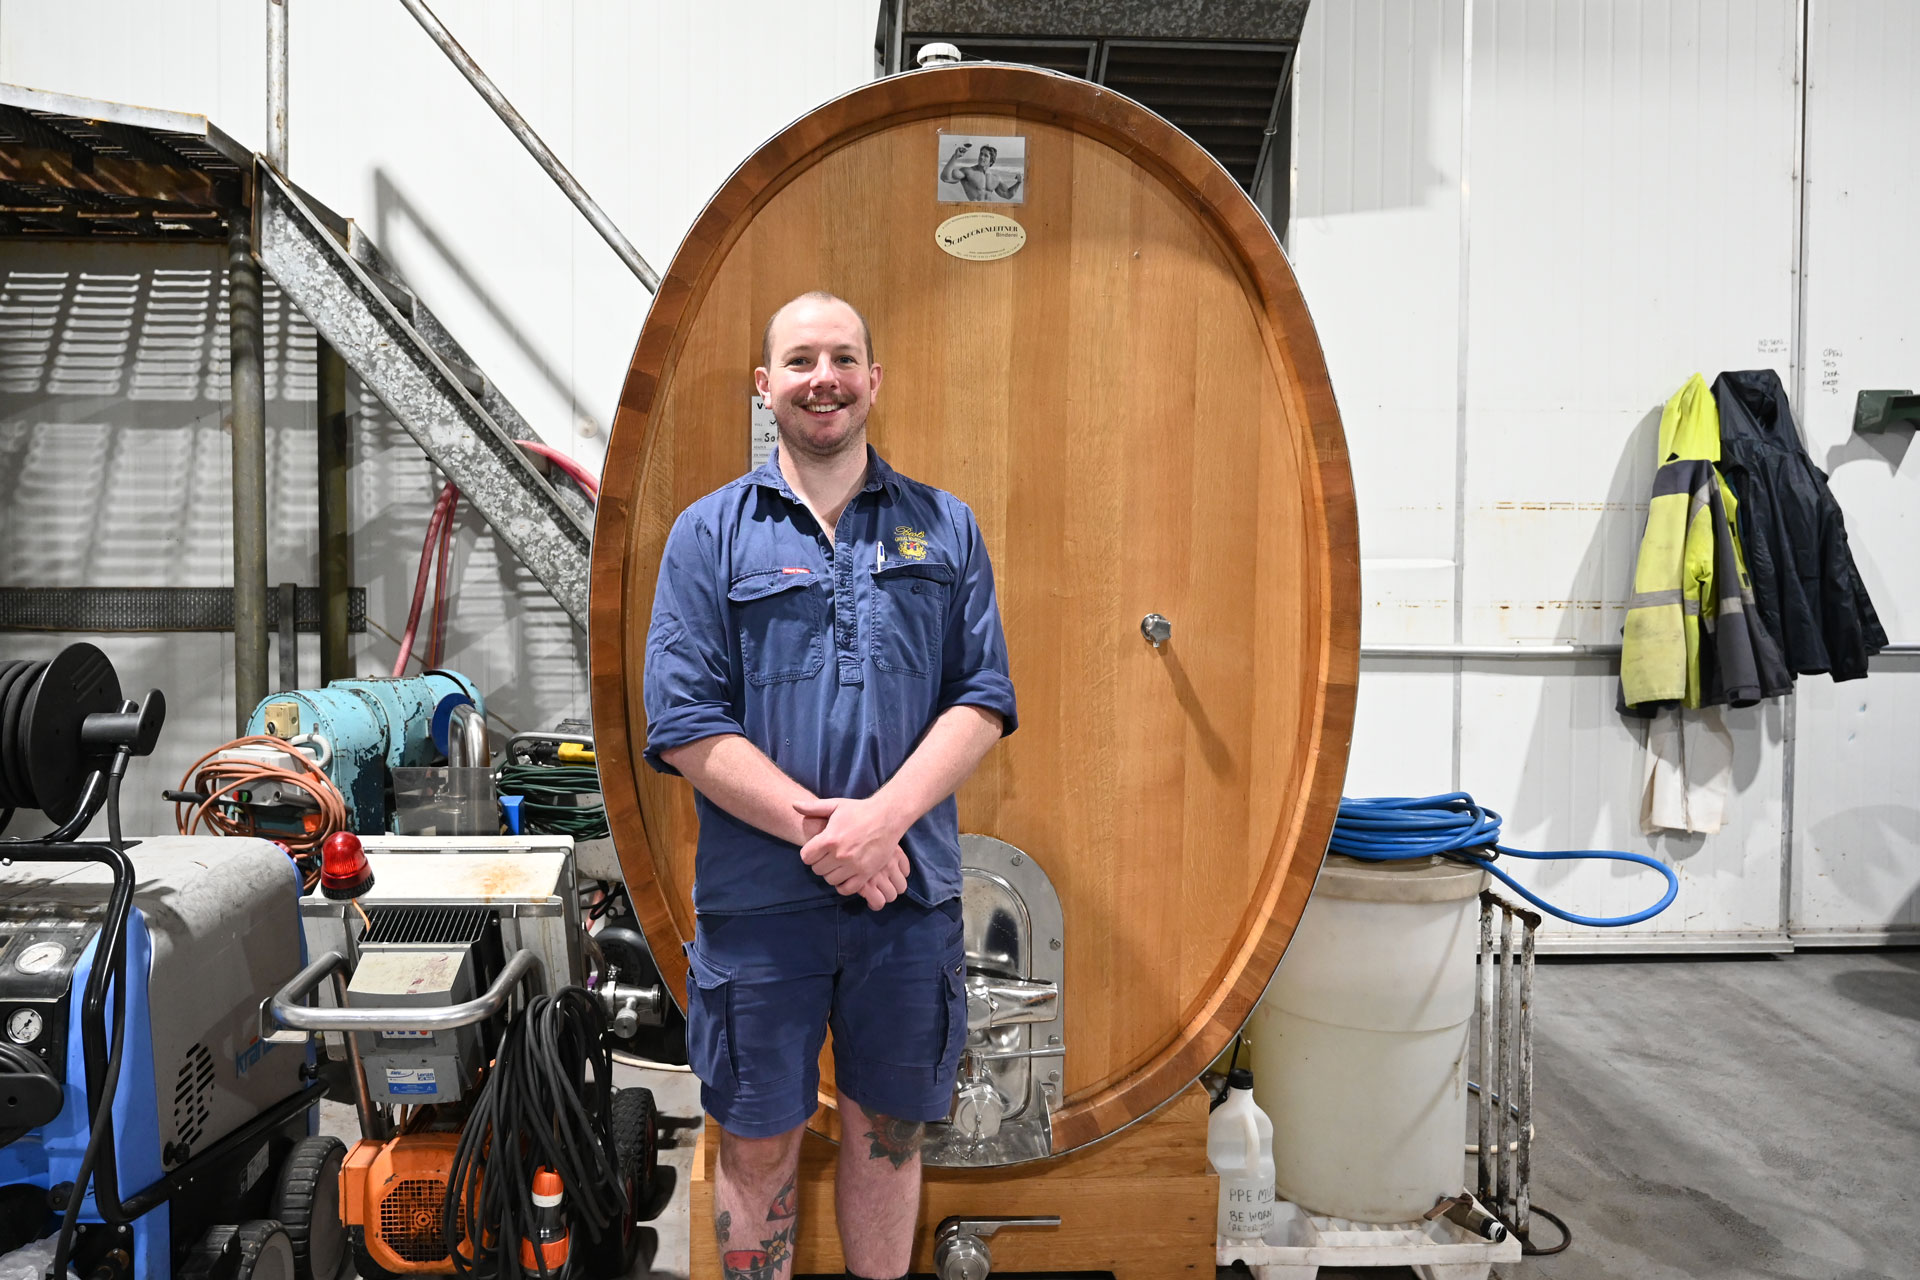 Winemaker Jacob Parton standing in front of a 2,500 litre oak foudre